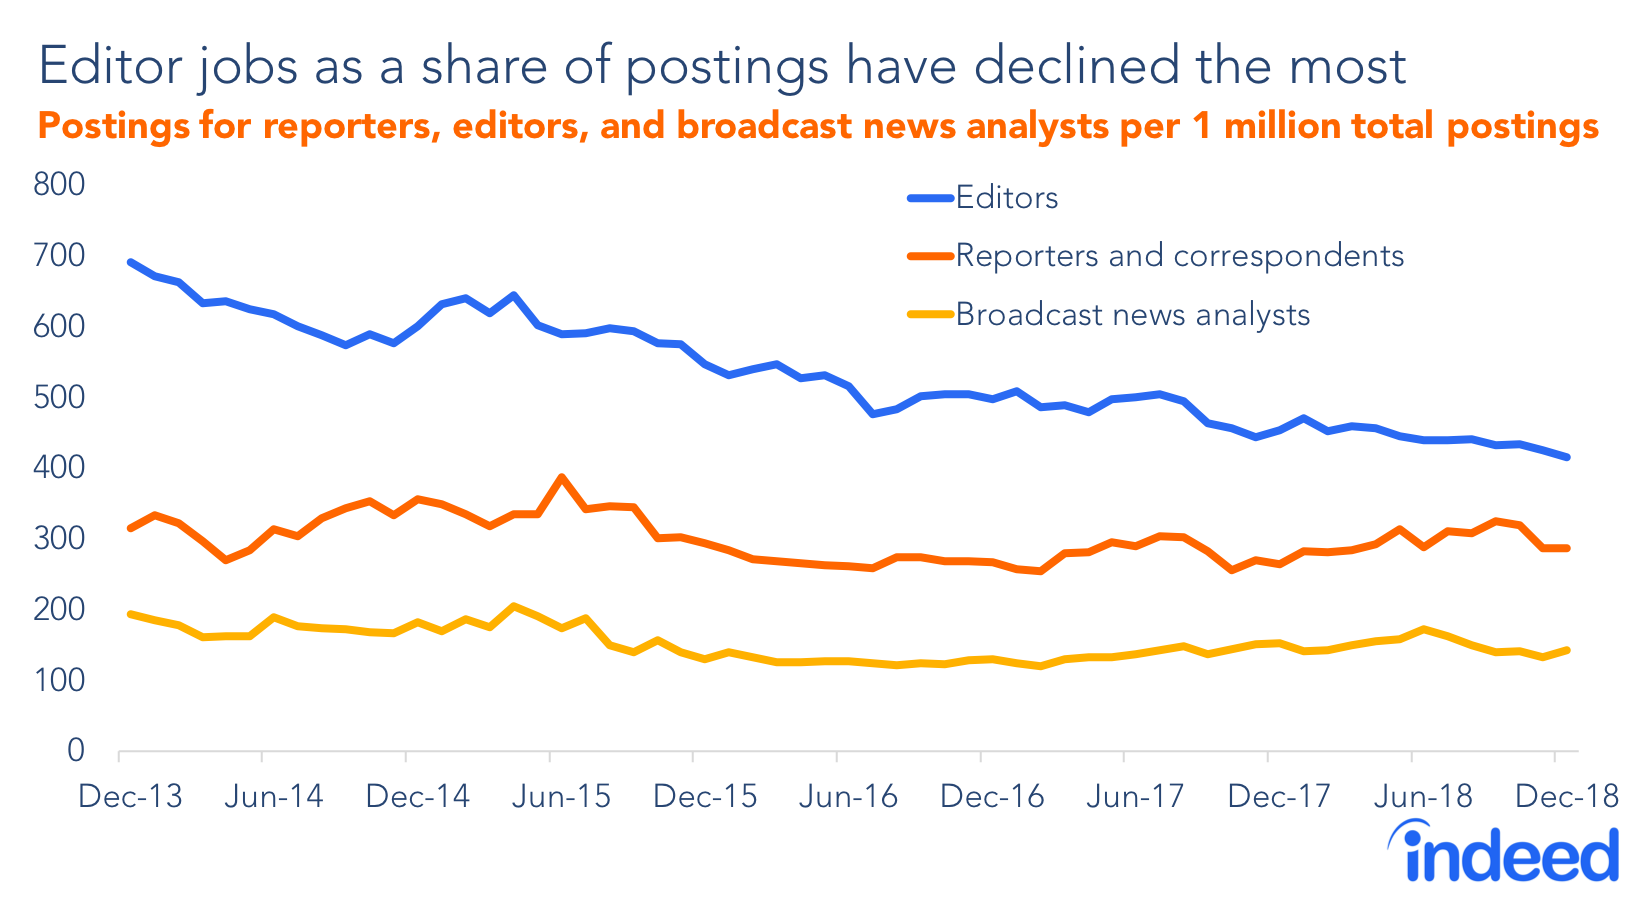 Editor jobs as a share of postings have declined the most